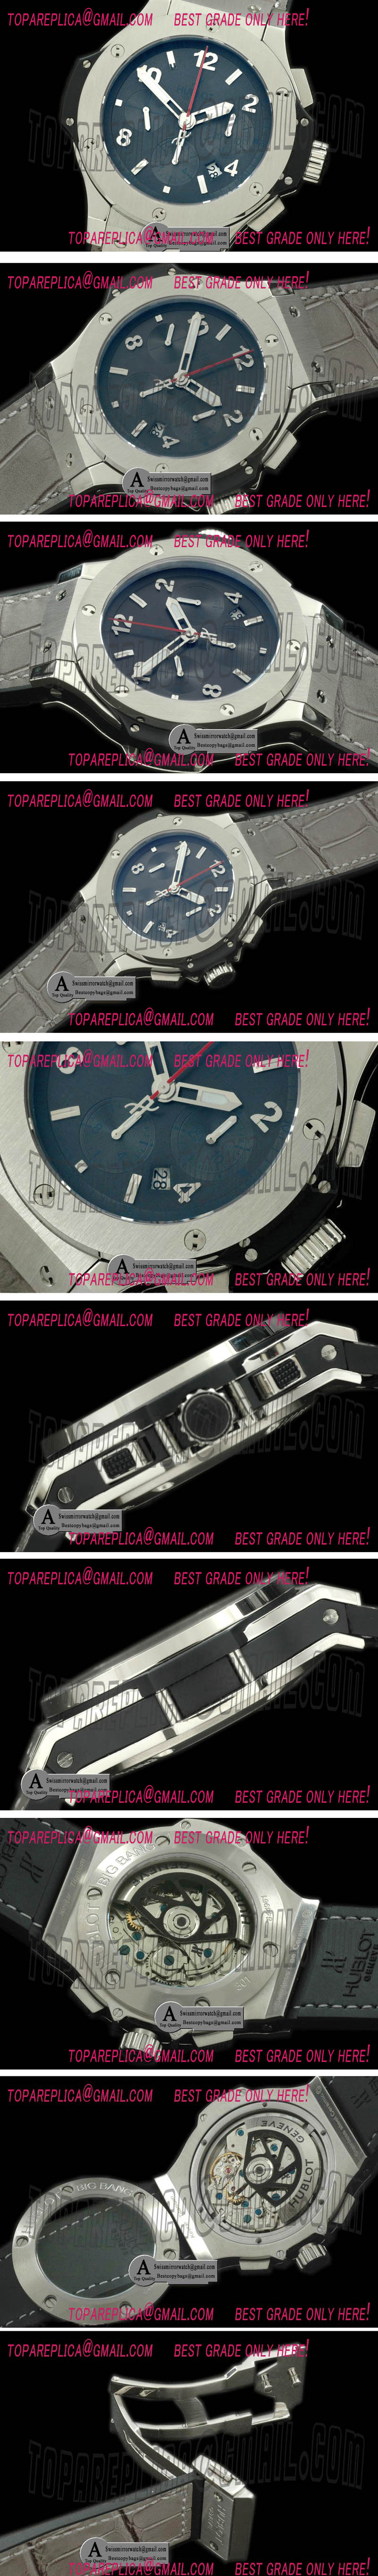 Hublot Earl Grey Limited Edition SS/SS Grey A-7750 Replica Watches